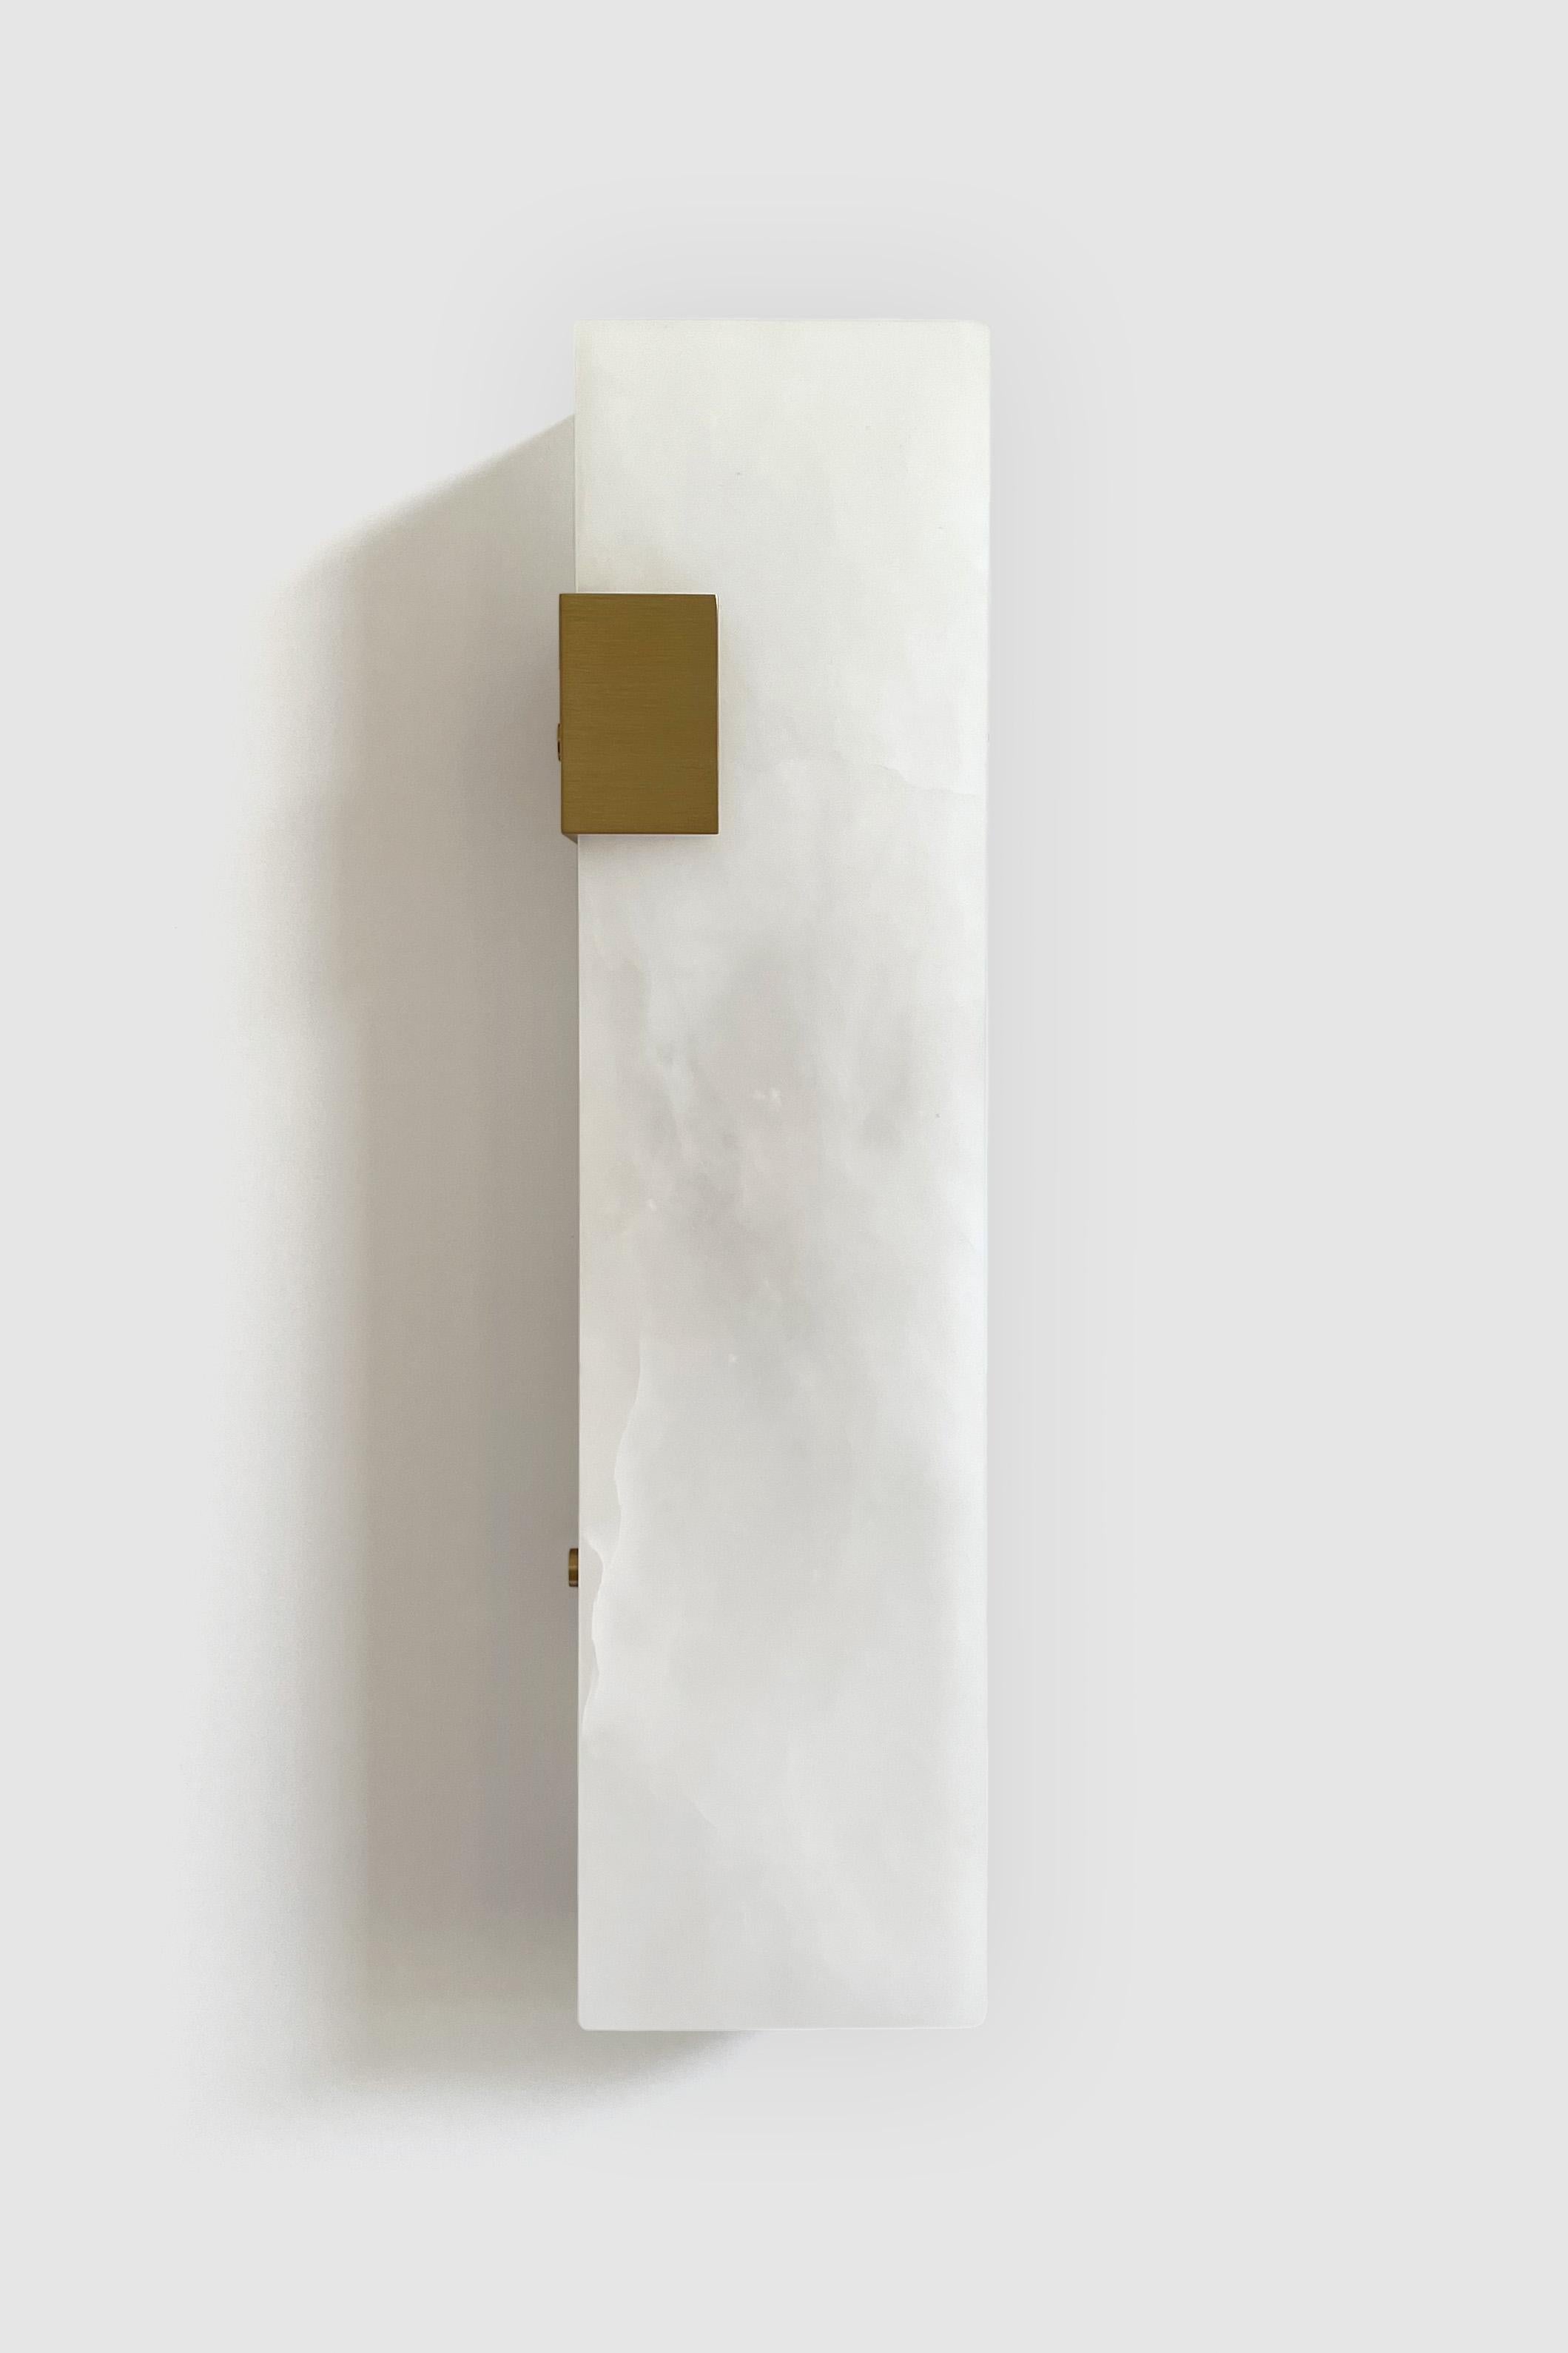 Orphan Work 003-1C Sconce
Shown in brushed brass and alabaster 
Available in brushed brass, brushed nickel and blackened brass
Measures: 19” H x 5 1/4” W x 3 7/8” D
Wall or ceiling mount
Vertical or horizontal
Plug-in by request
1-4 adjustable